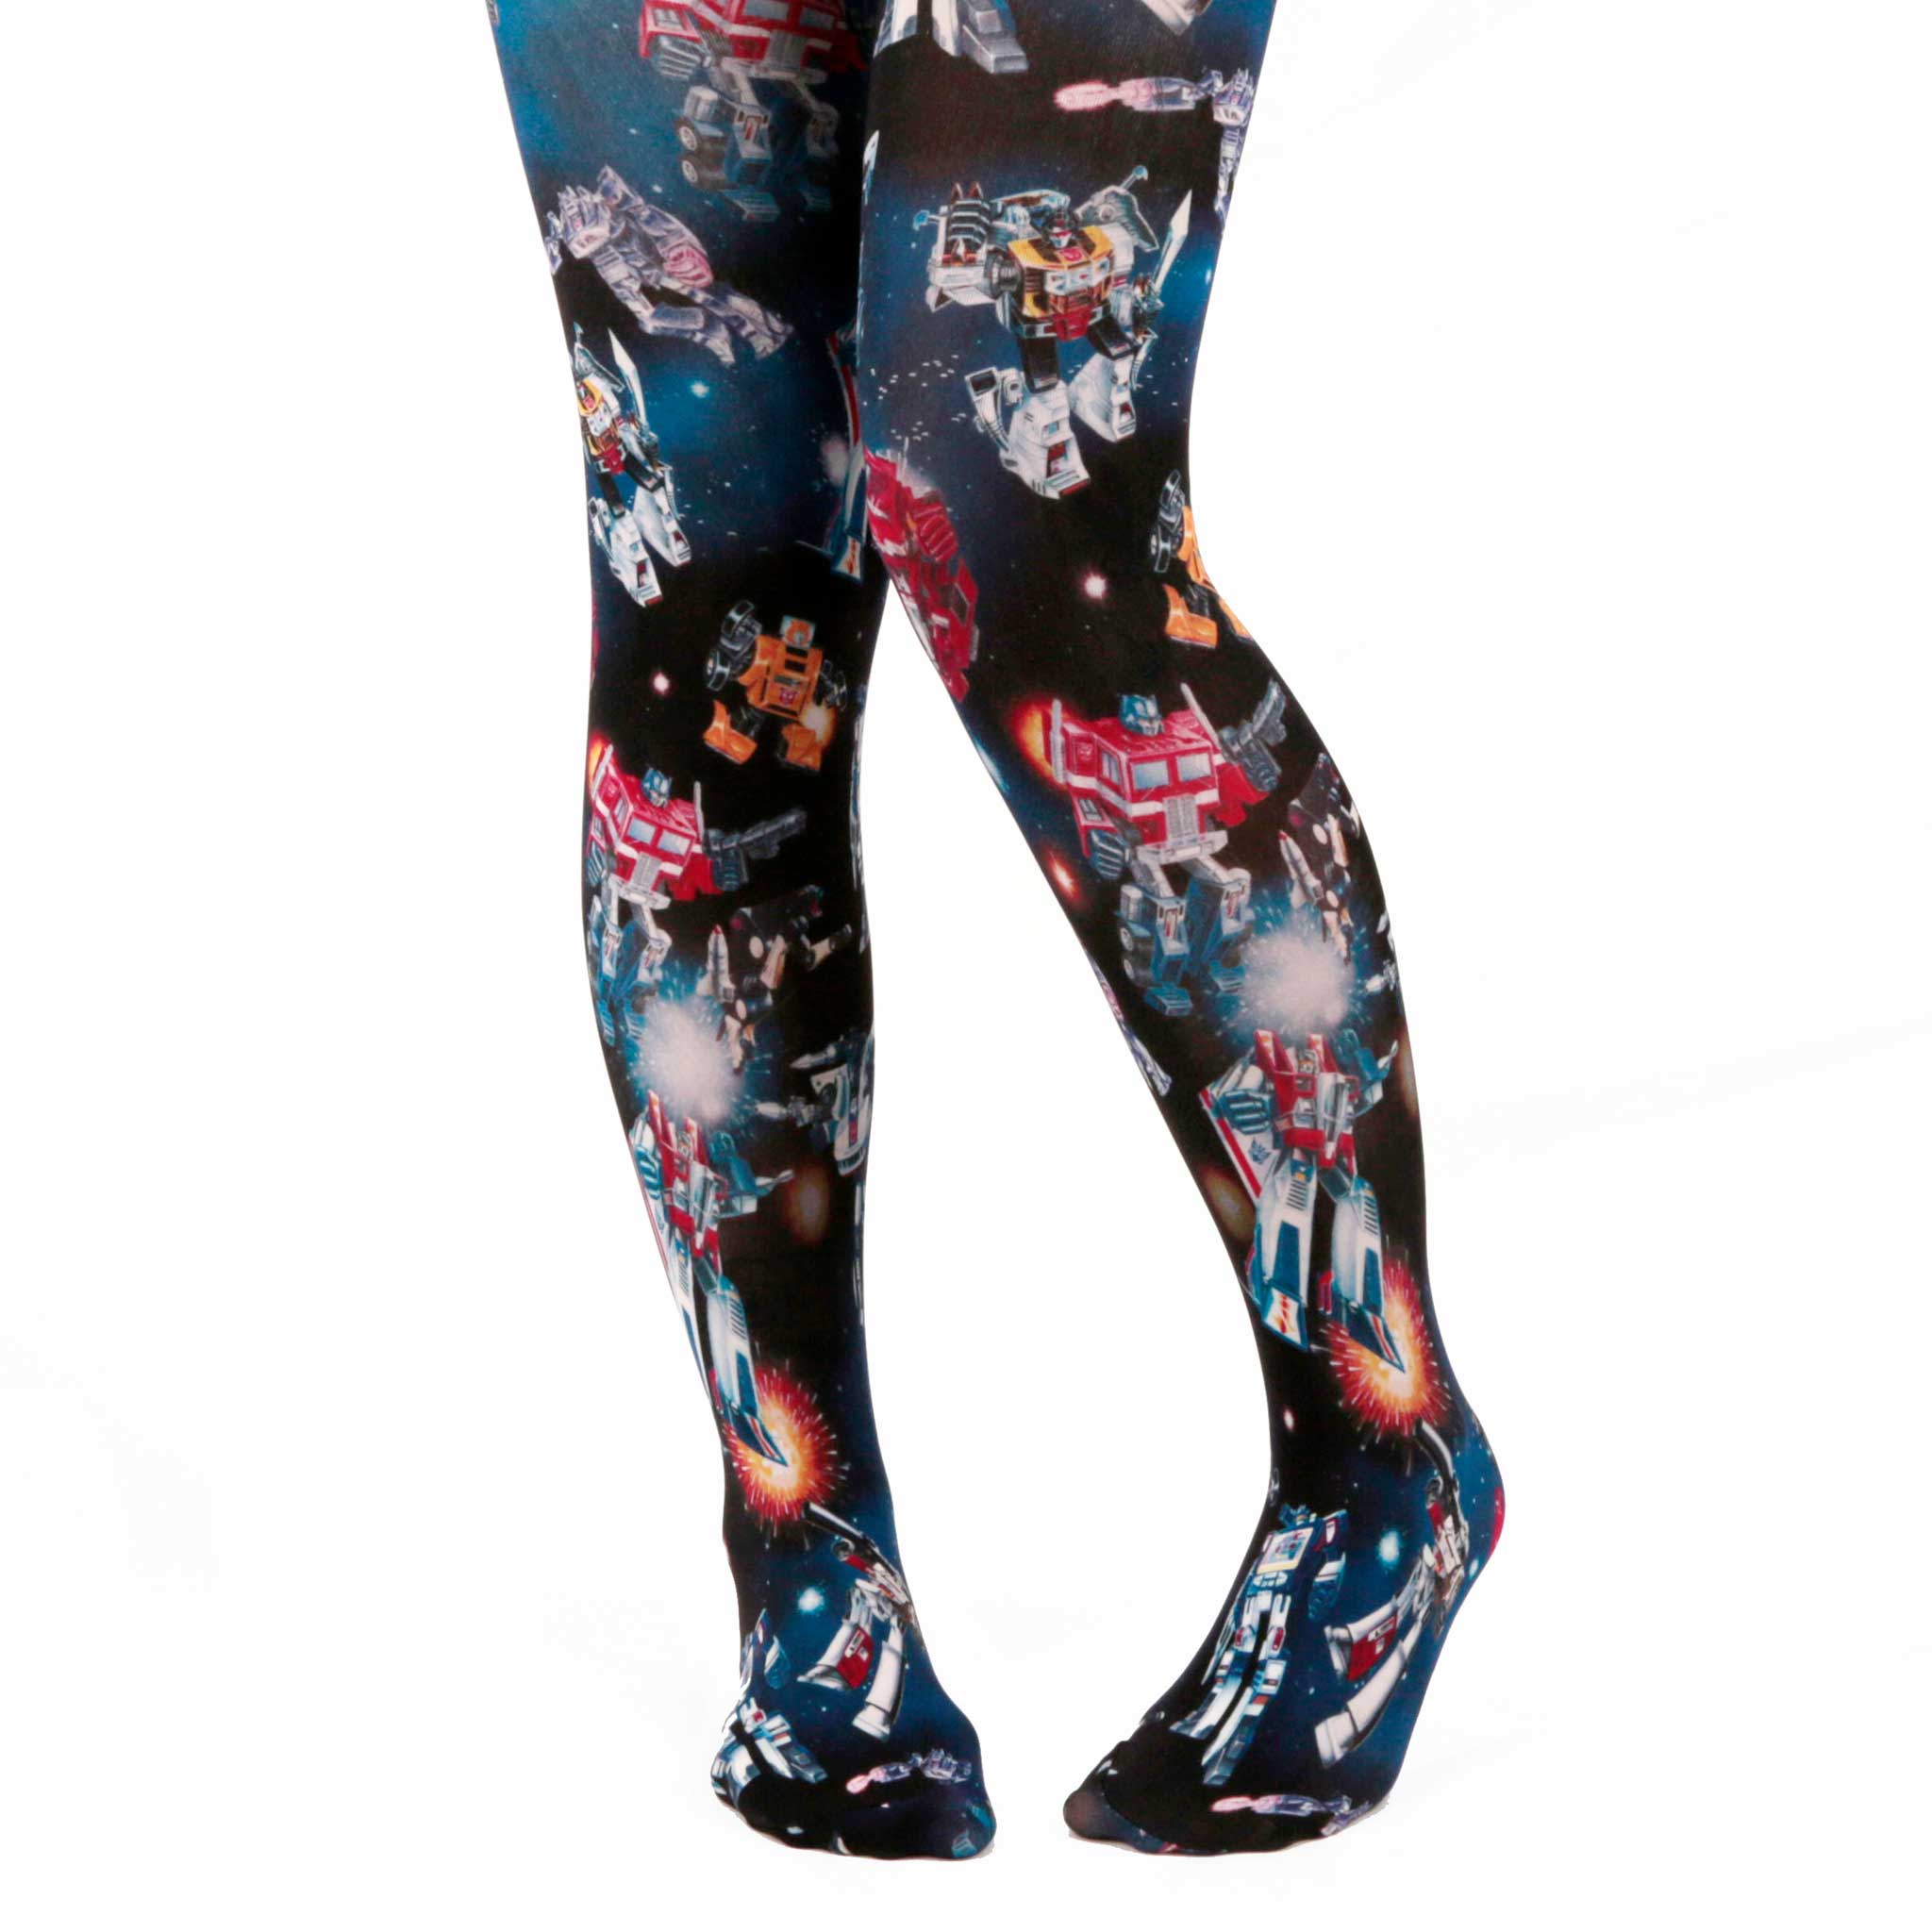 A pair of Transformers inspired tights featuring a black and blue print of Autobots and Decepticons floating in outer space, locked in battle. While yellow, red and white explosions are scattered over the midnight sky.